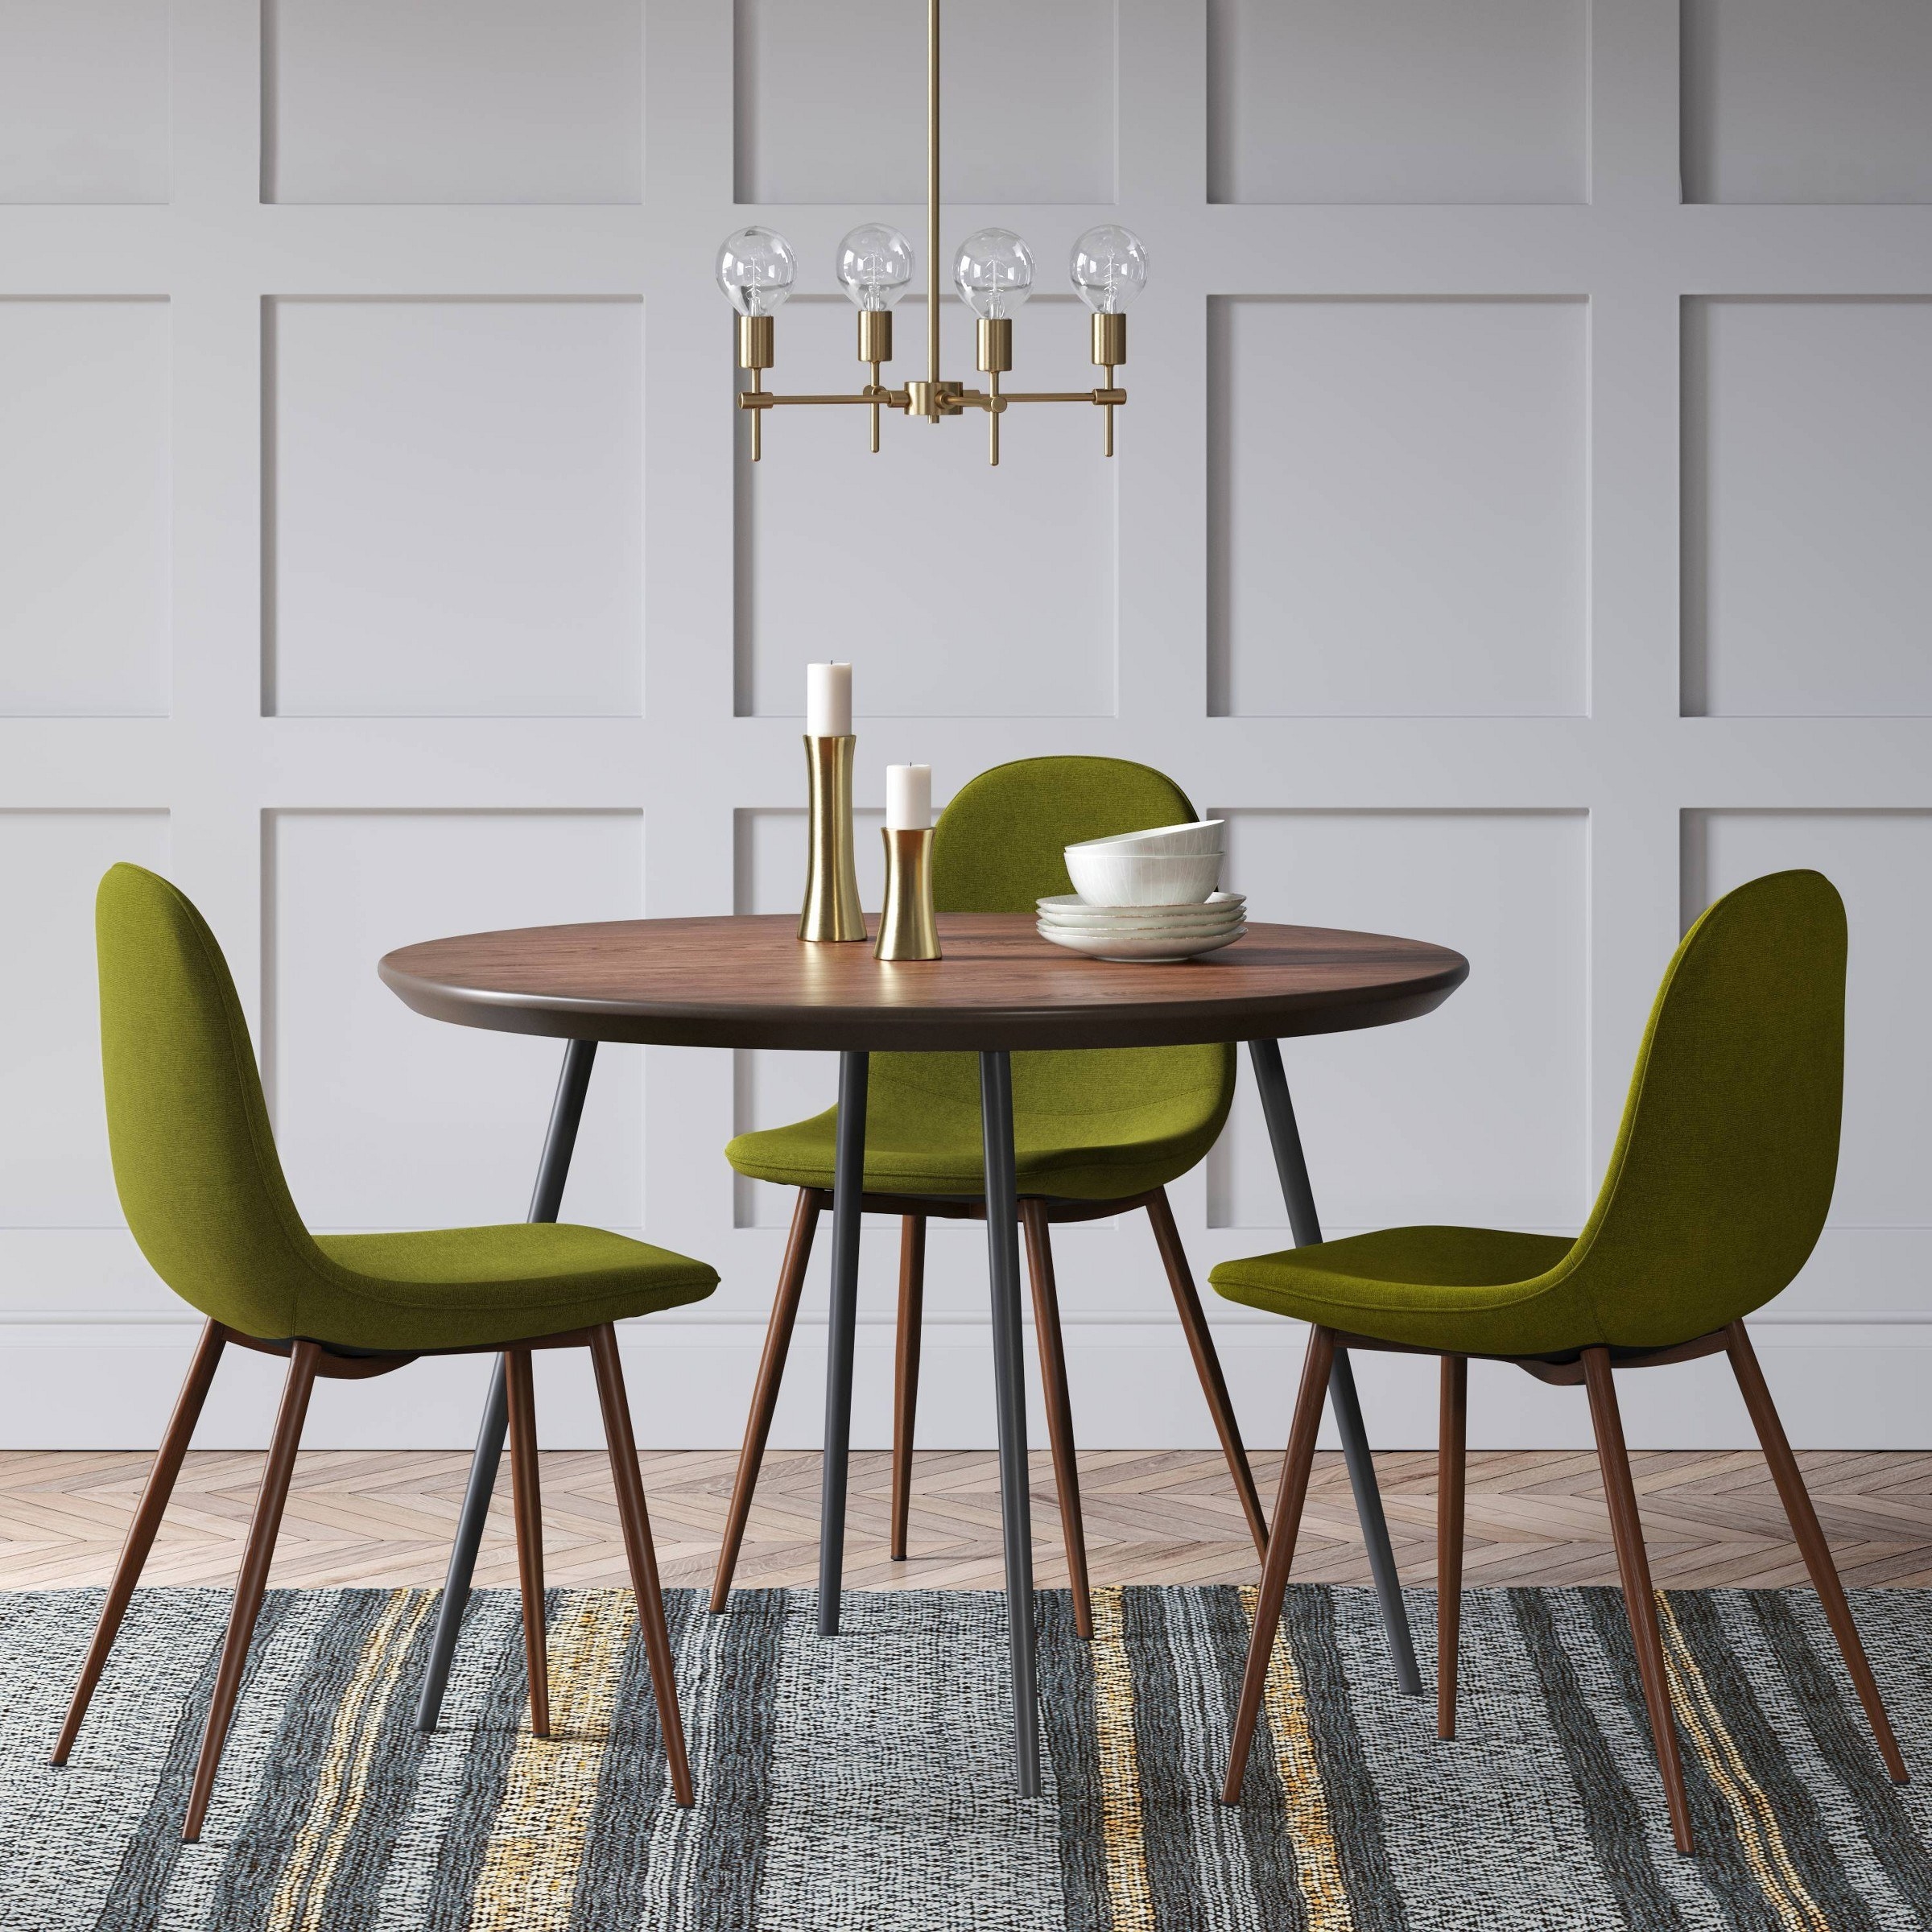 three of the dining chairs in green around a wooden table